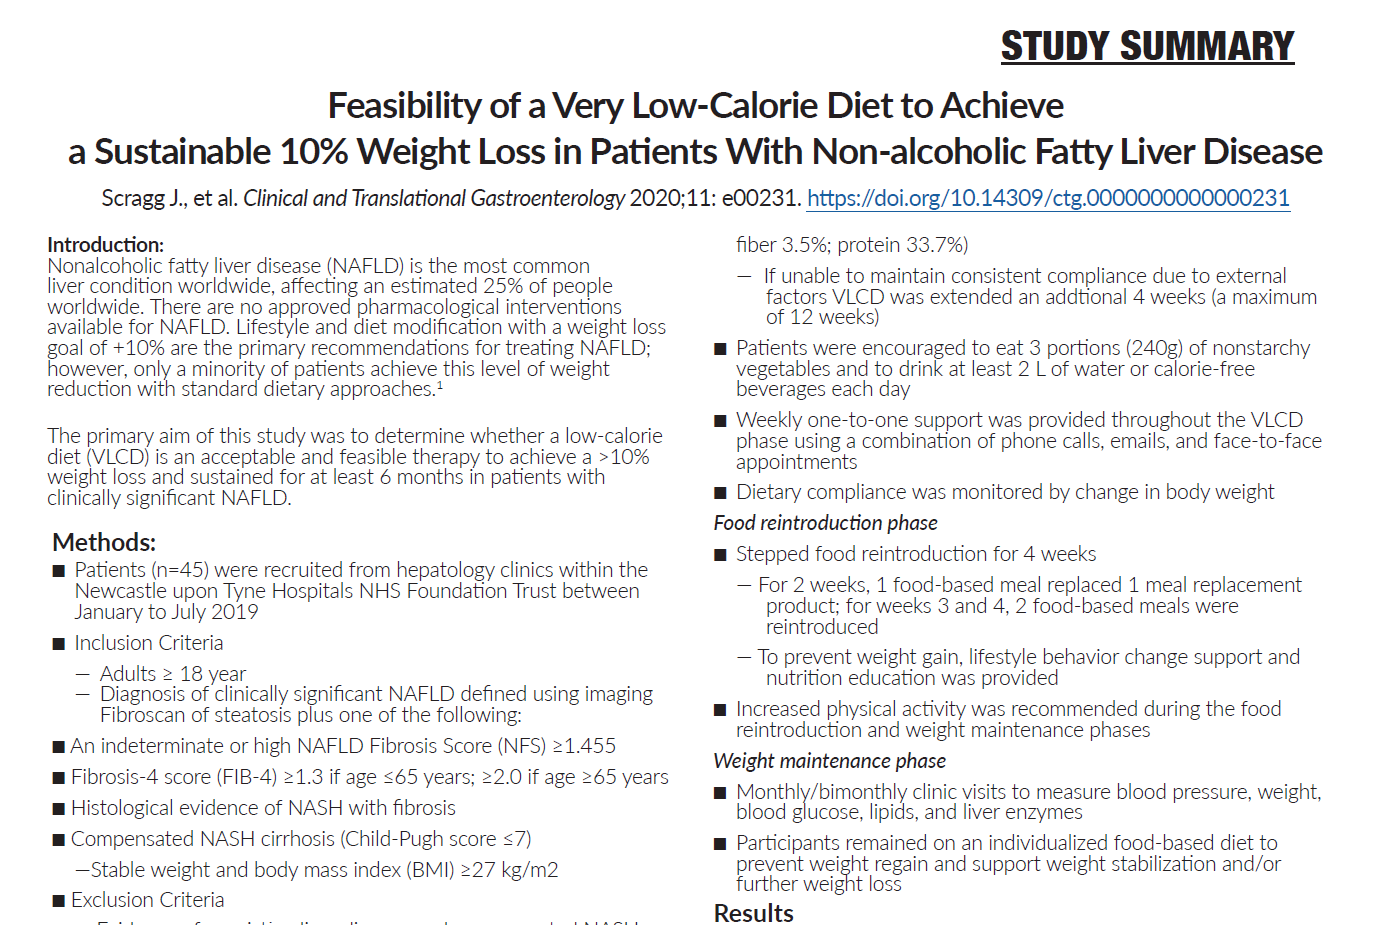 Feasibility of a VLCD to achieve a sustainable 10% weight loss in patients with NAFLD